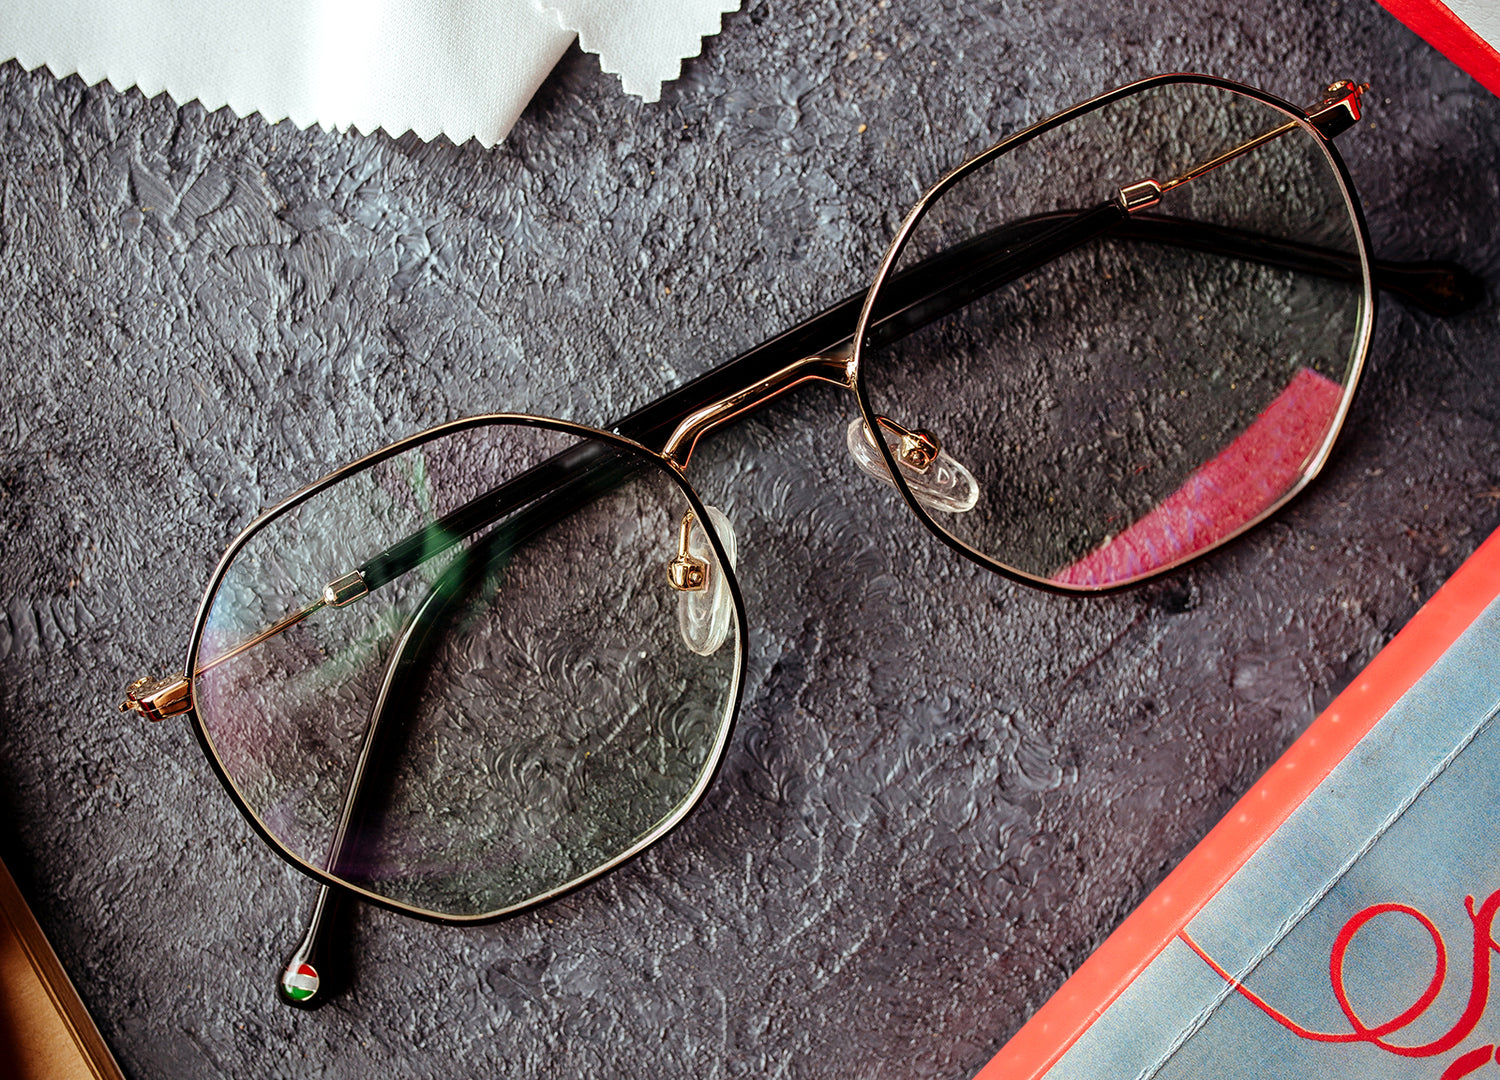 Giving Vision a Second Life: What Can You Do with Your Old Eyeglasses?